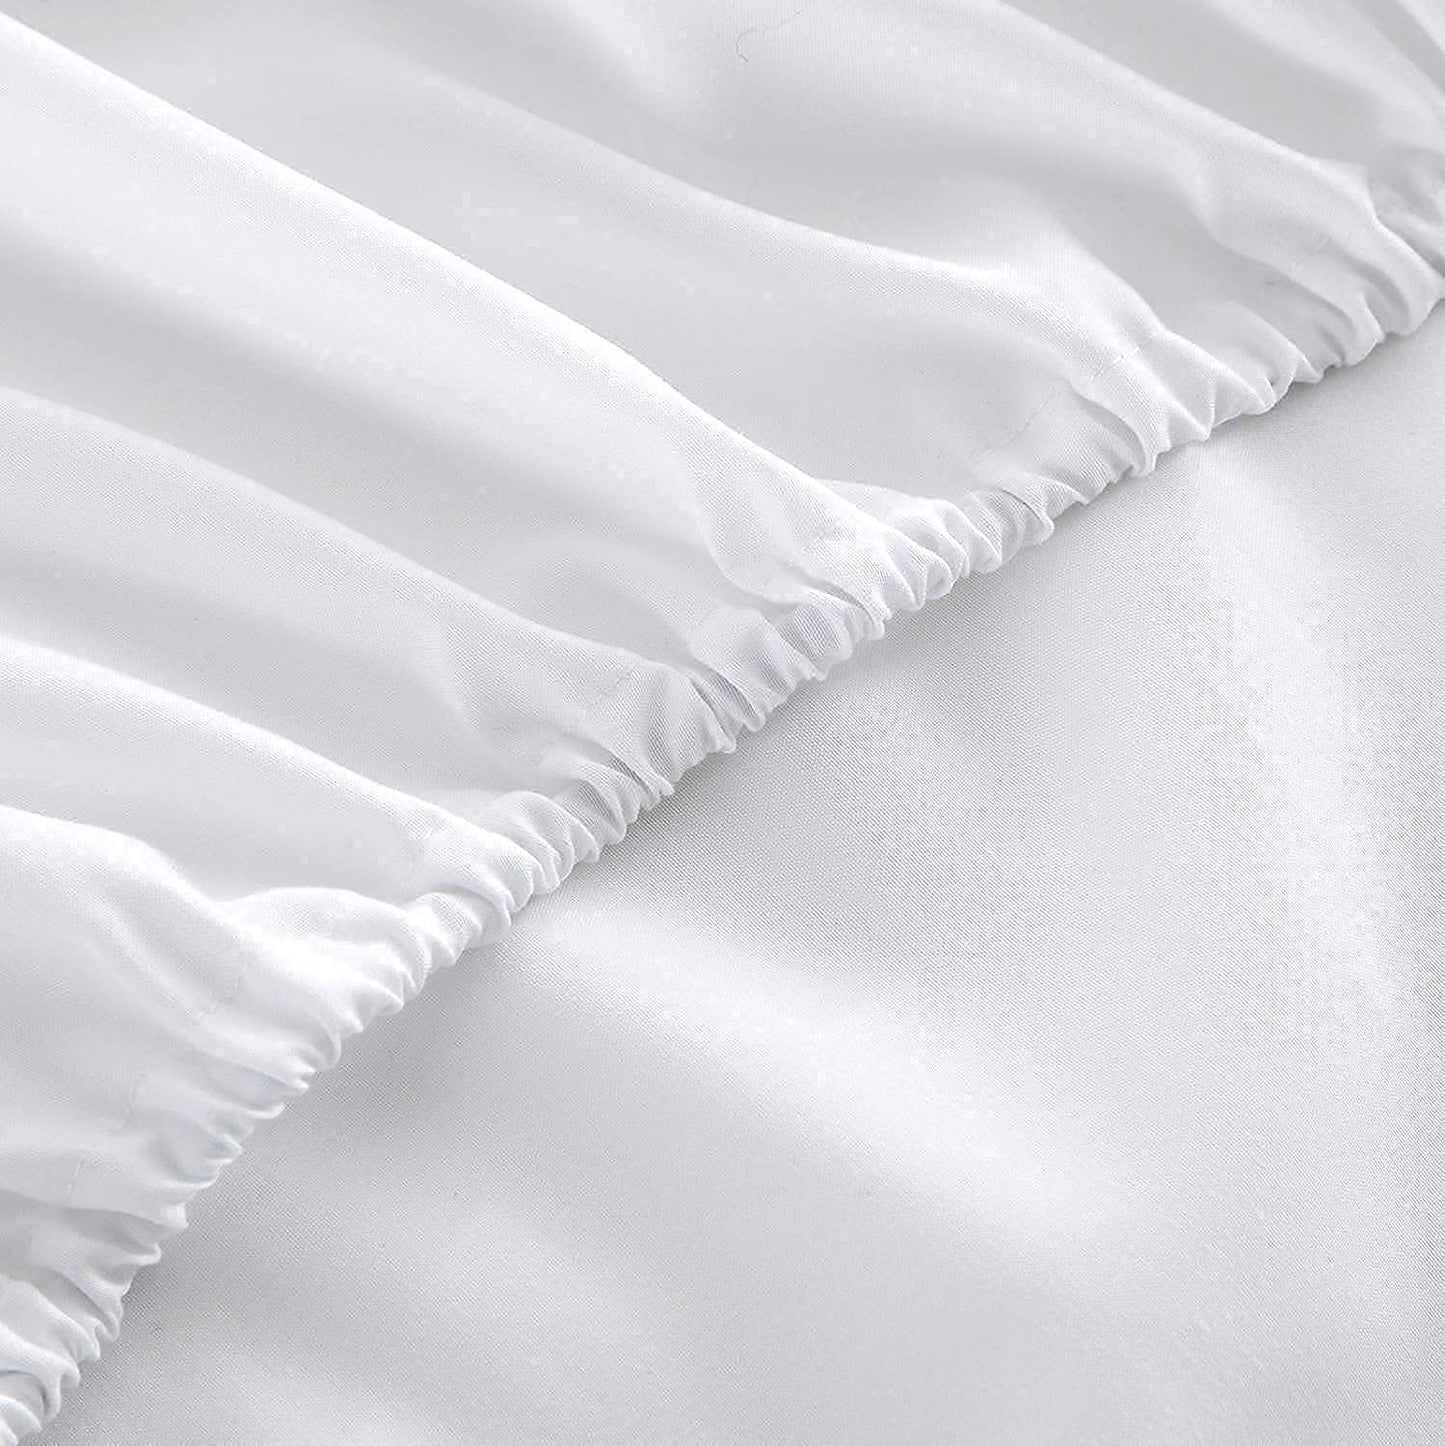 30 Inch Deep Pocket Fitted Sheets 1000TC Egyptian Cotton King at-EgyptianHomeLinens.com